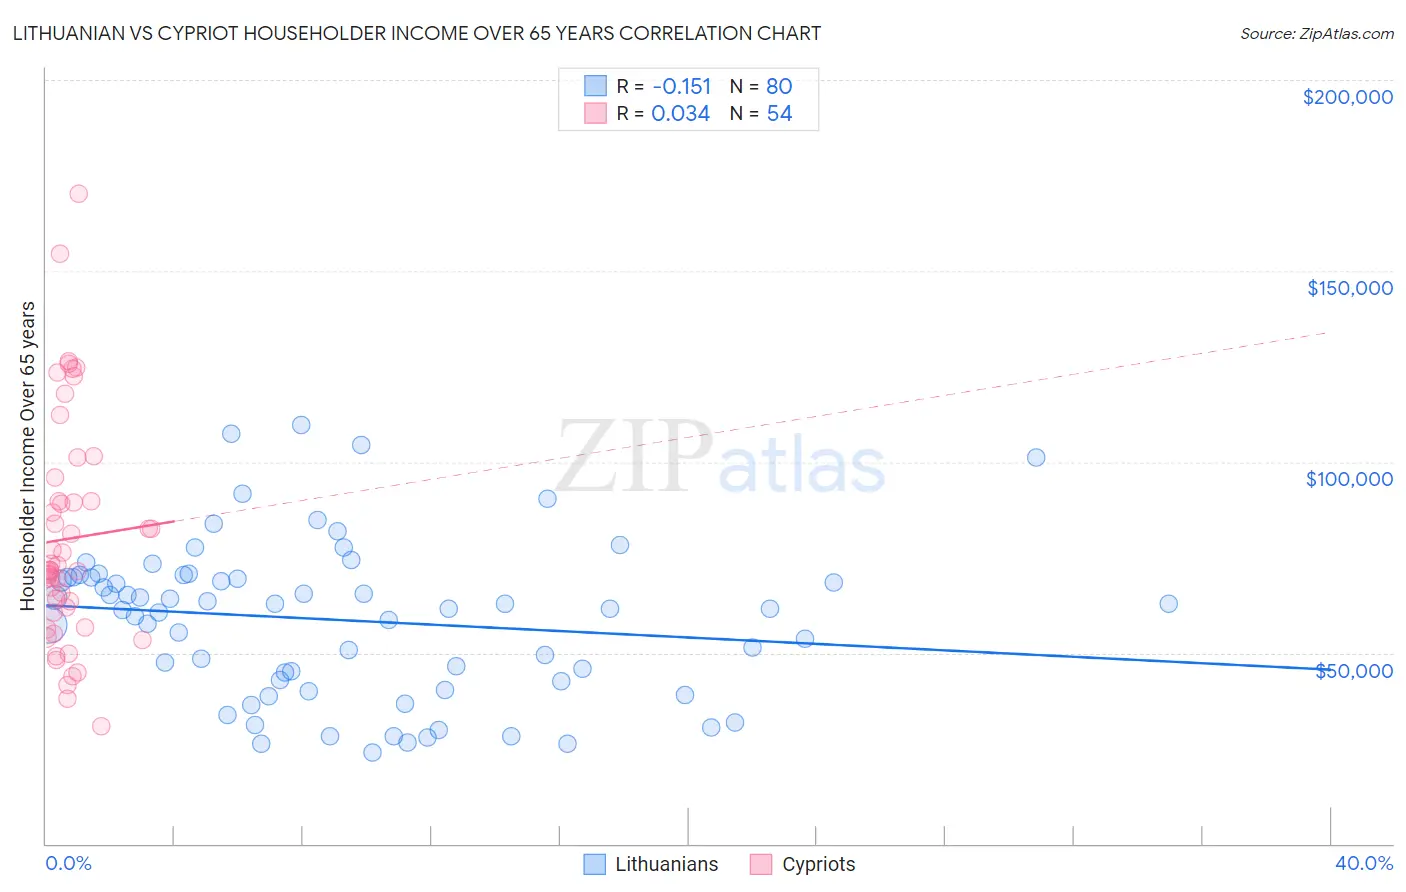 Lithuanian vs Cypriot Householder Income Over 65 years